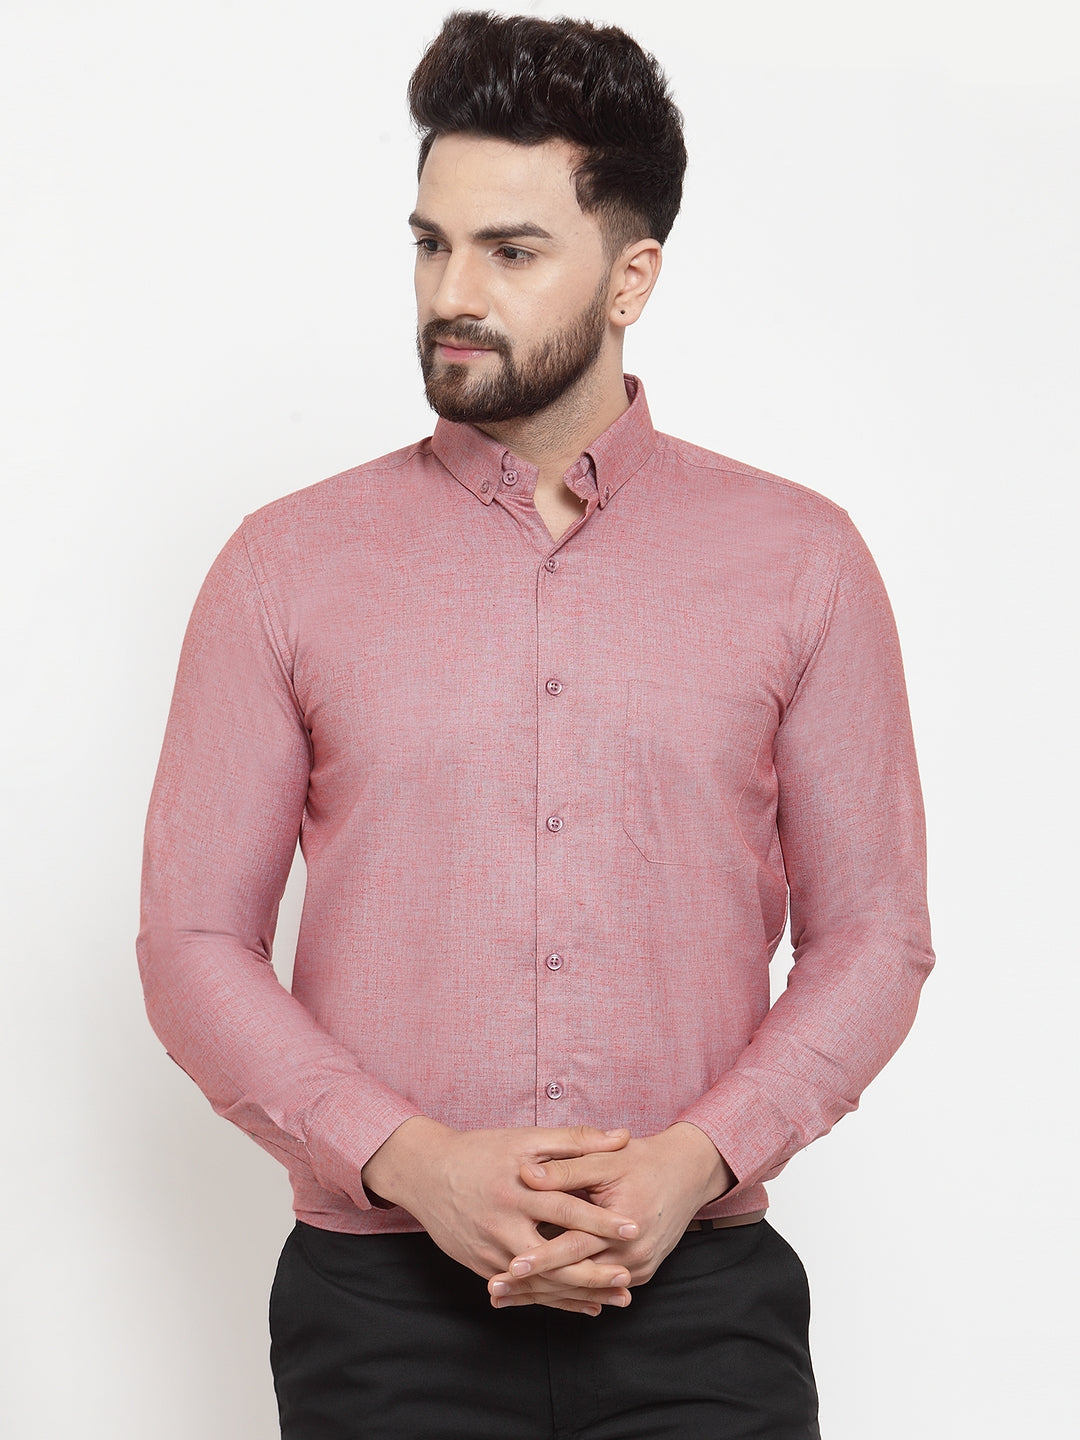 Men's Coral Cotton Solid Button Down Formal Shirts ( SF 753Coral ) - Jainish